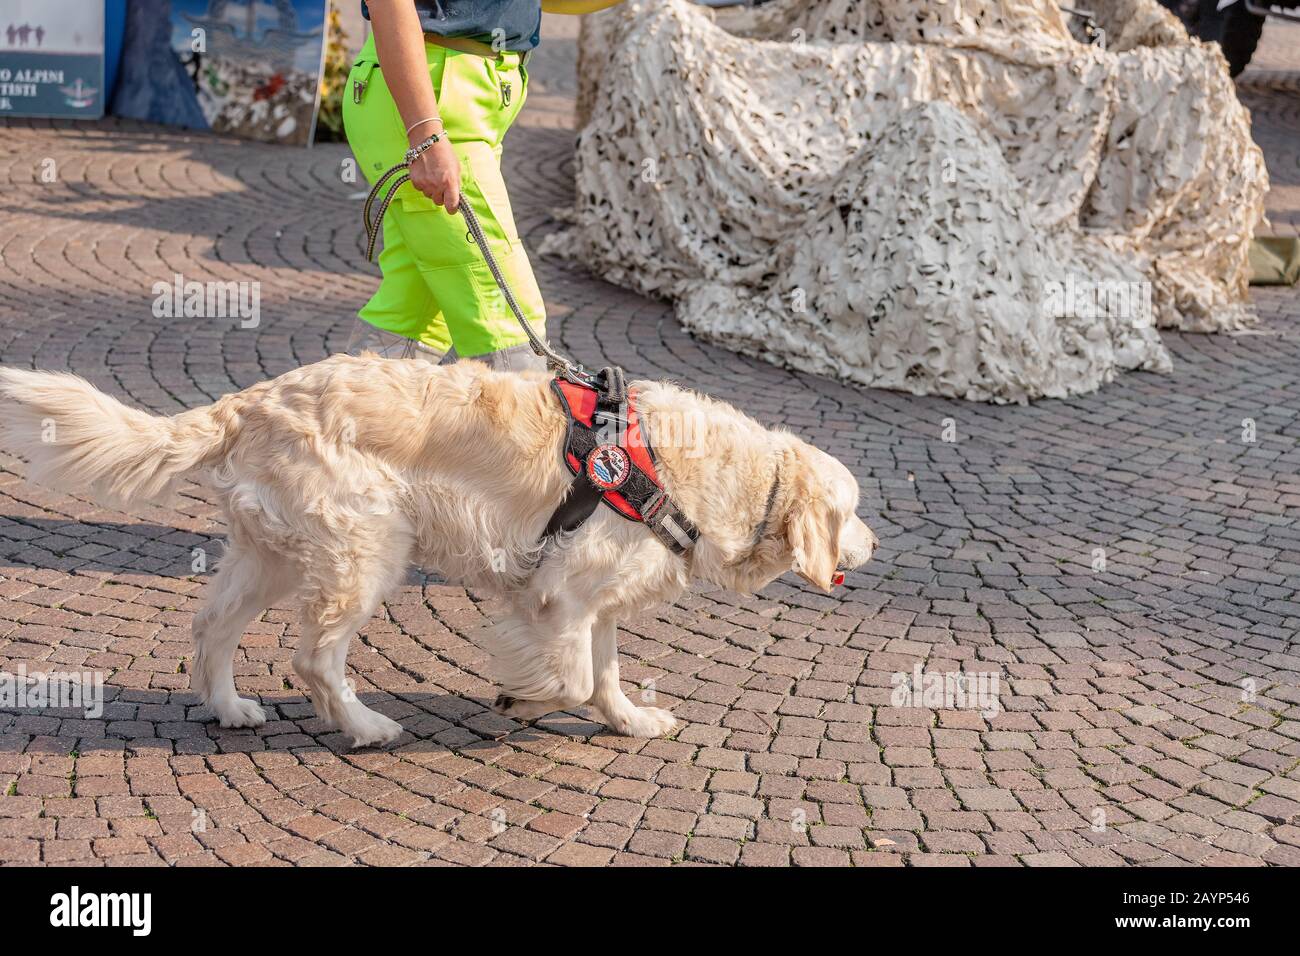 20 OCTOBER 2018, VERONA, ITALY: Service dog and cynological rescue canine at the open exhibition at the city street Stock Photo